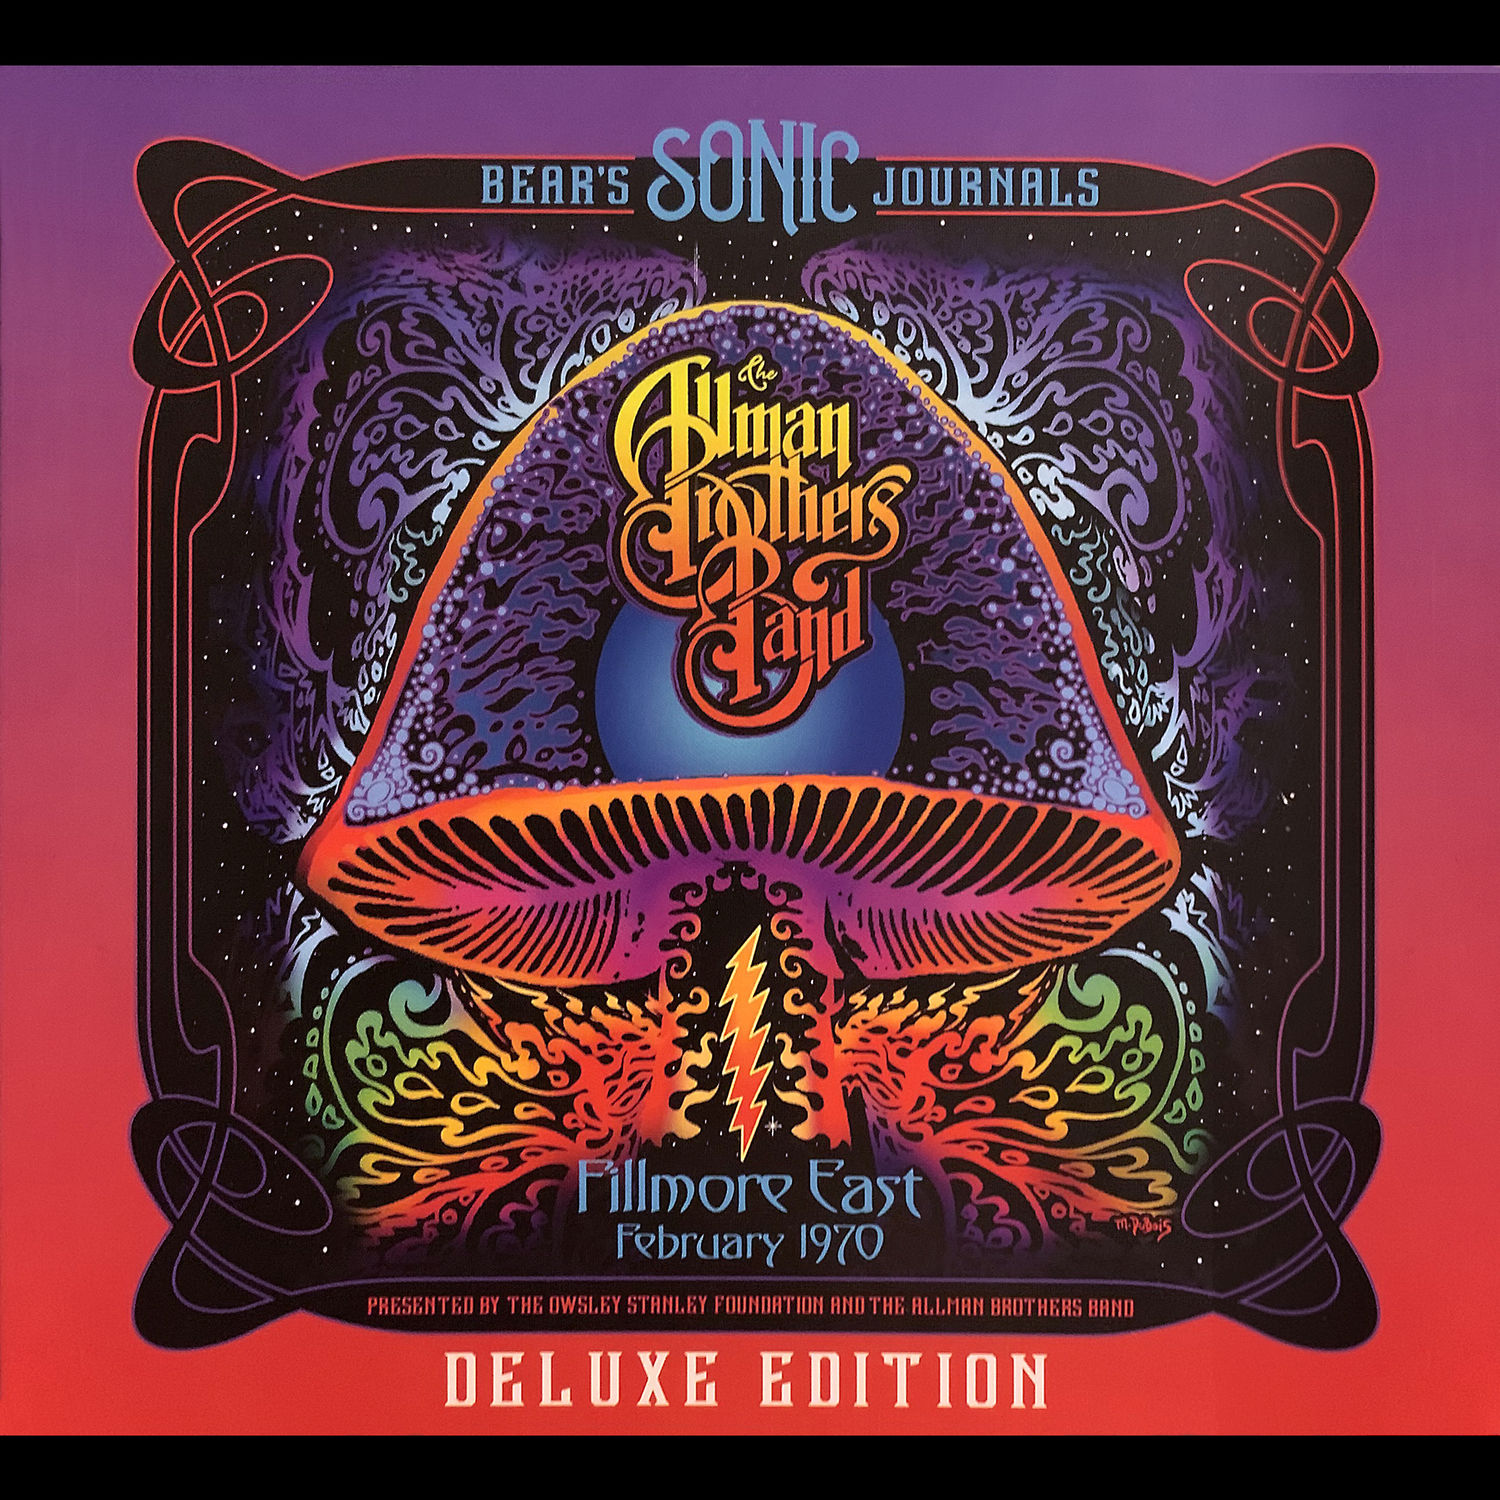 Allman Brothers Band - Bear’s Sonic Journals (Live at Fillmore East, February 1970 - Deluxe Edition) (2018/2021) [FLAC 24bit/96kHz]